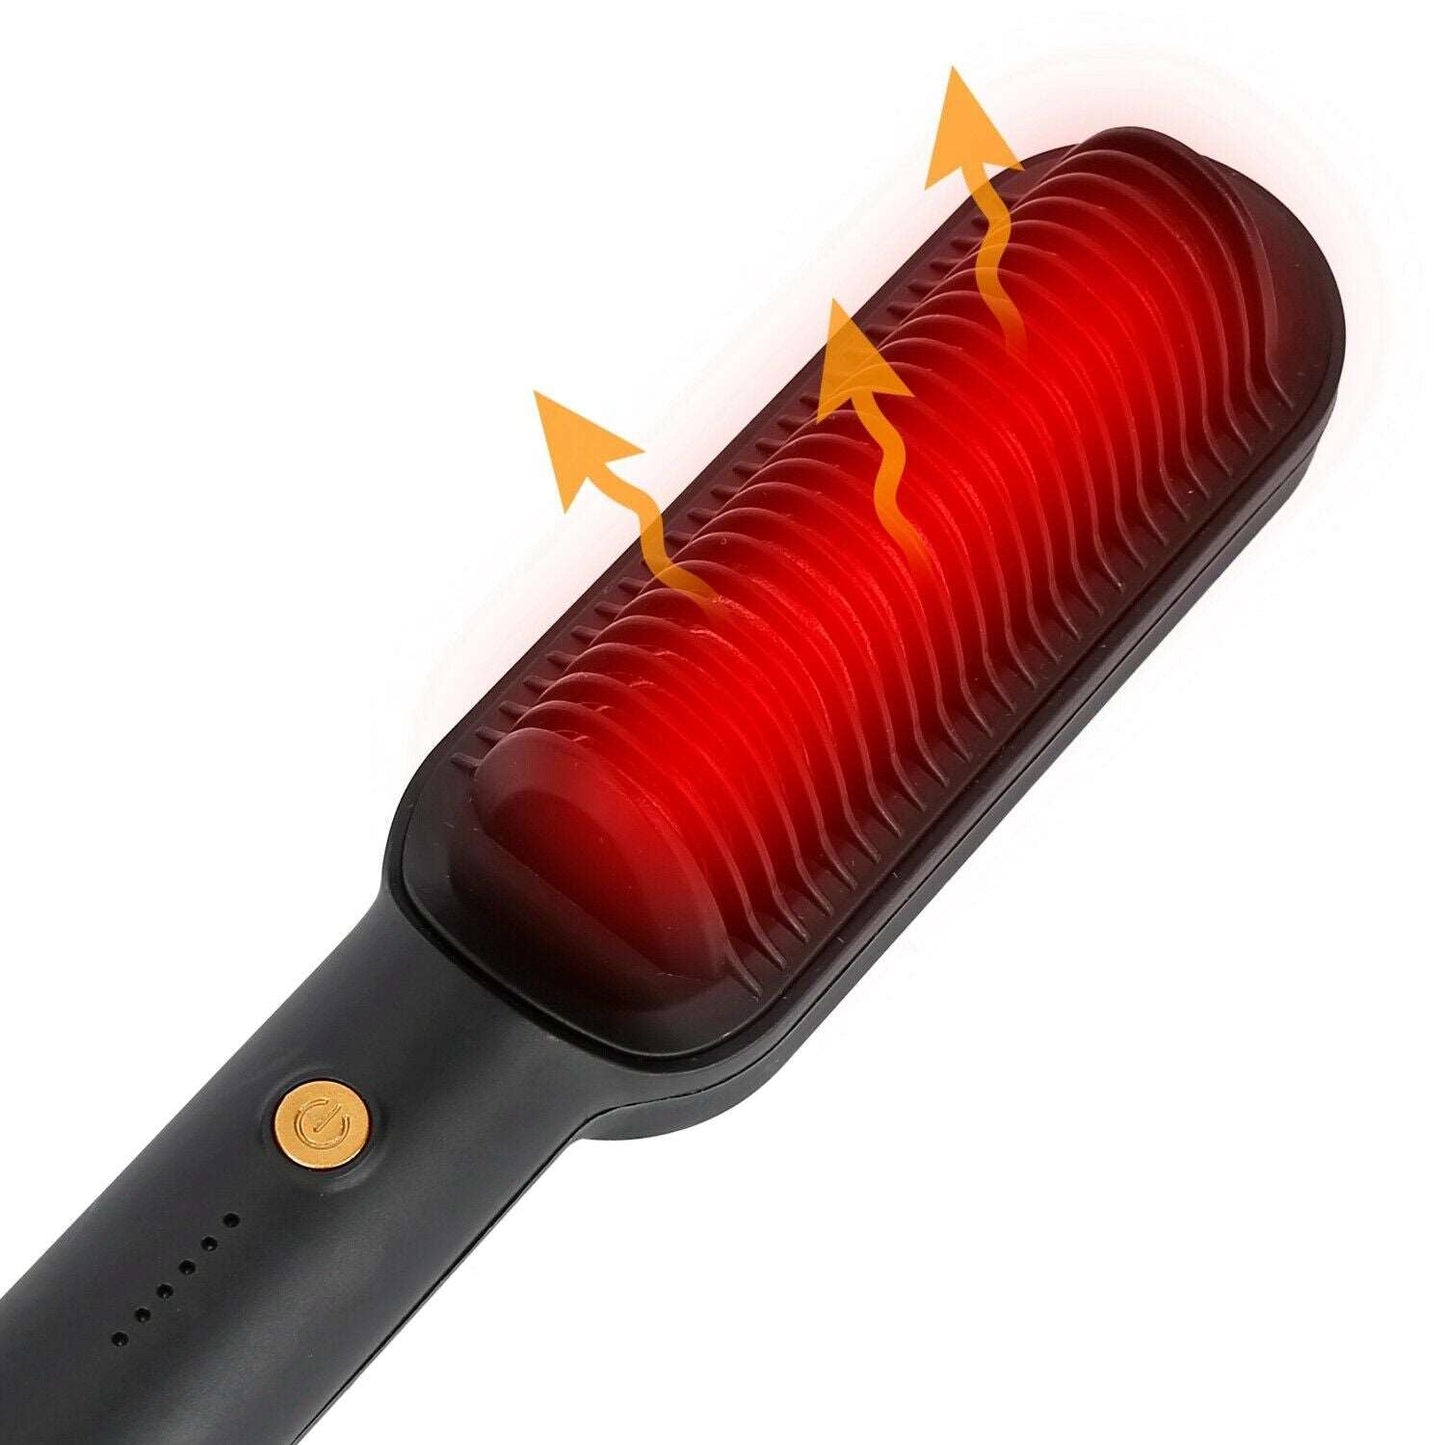 2-in-1 Electric Hair Straightener Brush Hot Comb Adjustment Heat Styling Curler